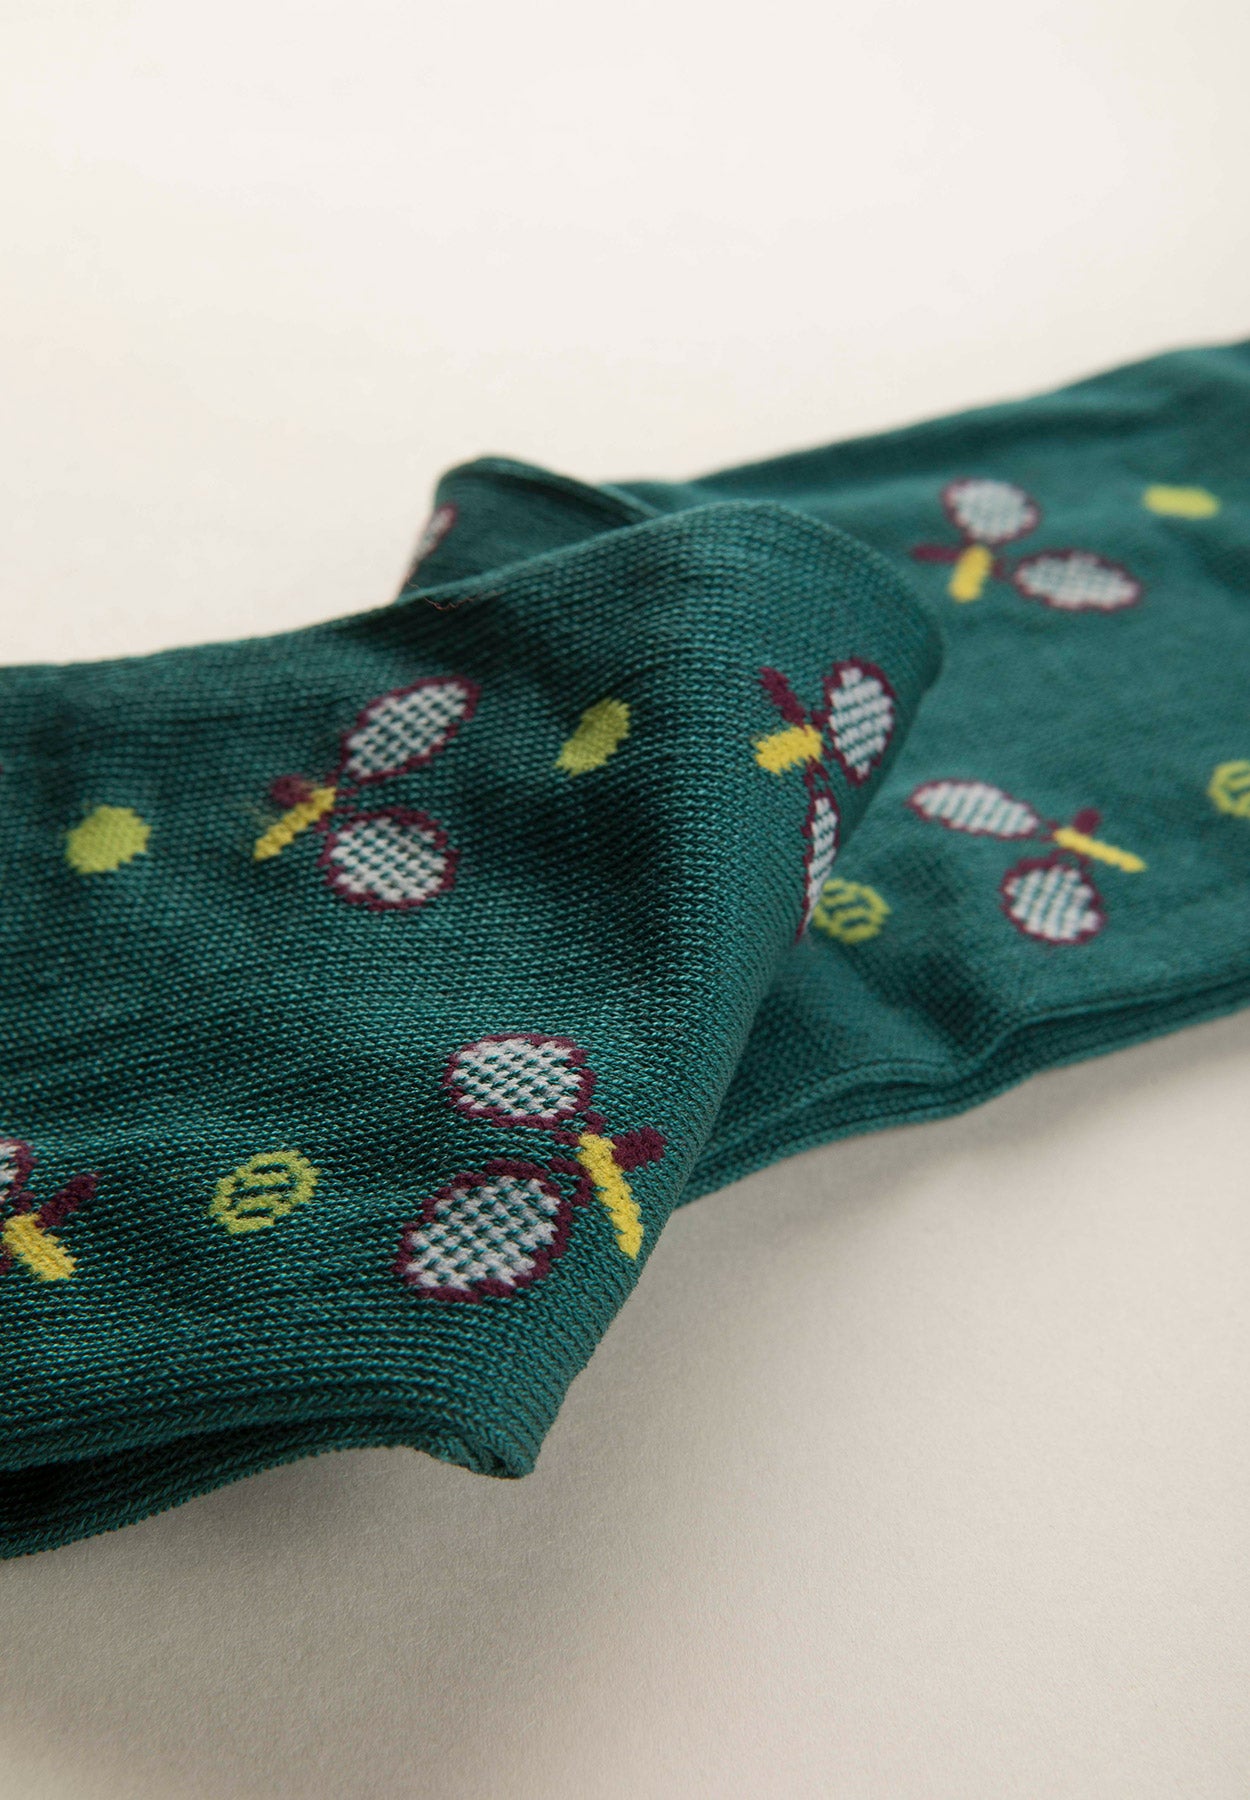 Green stretch cotton socks with tennis pattern